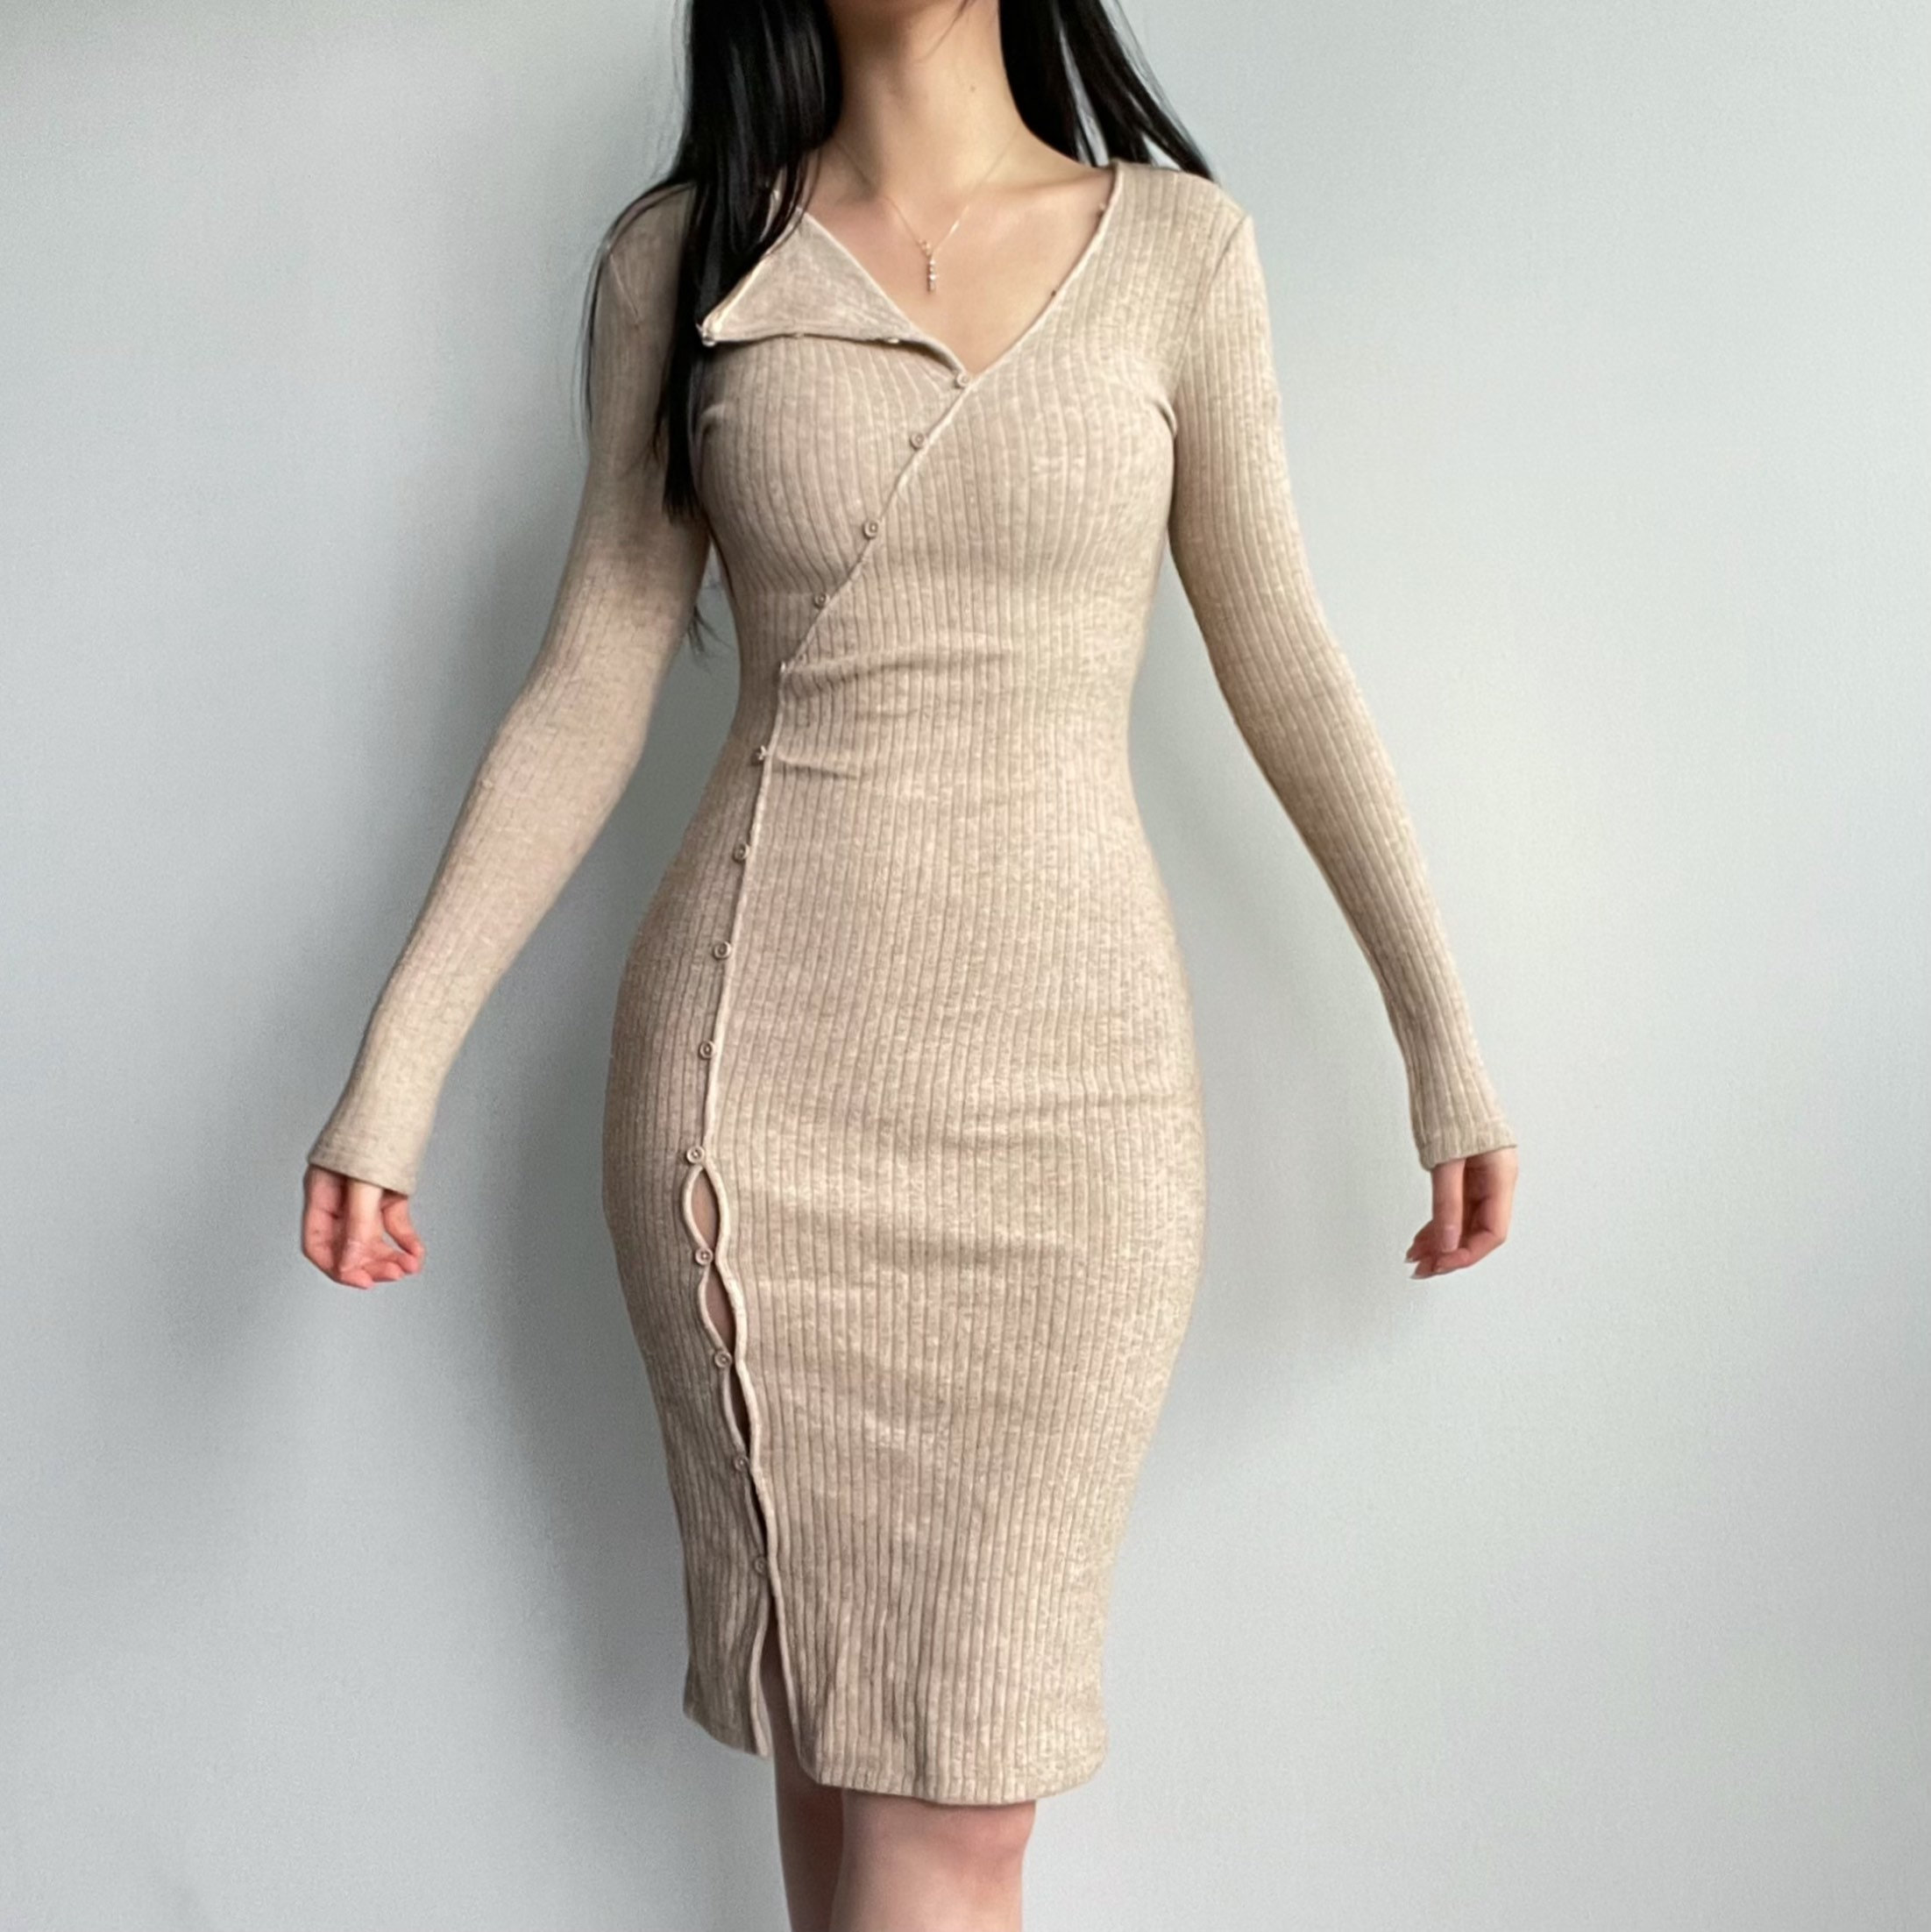 Y2K Button Knit Dress - Vintage-inspired Fashion for the Modern Woman